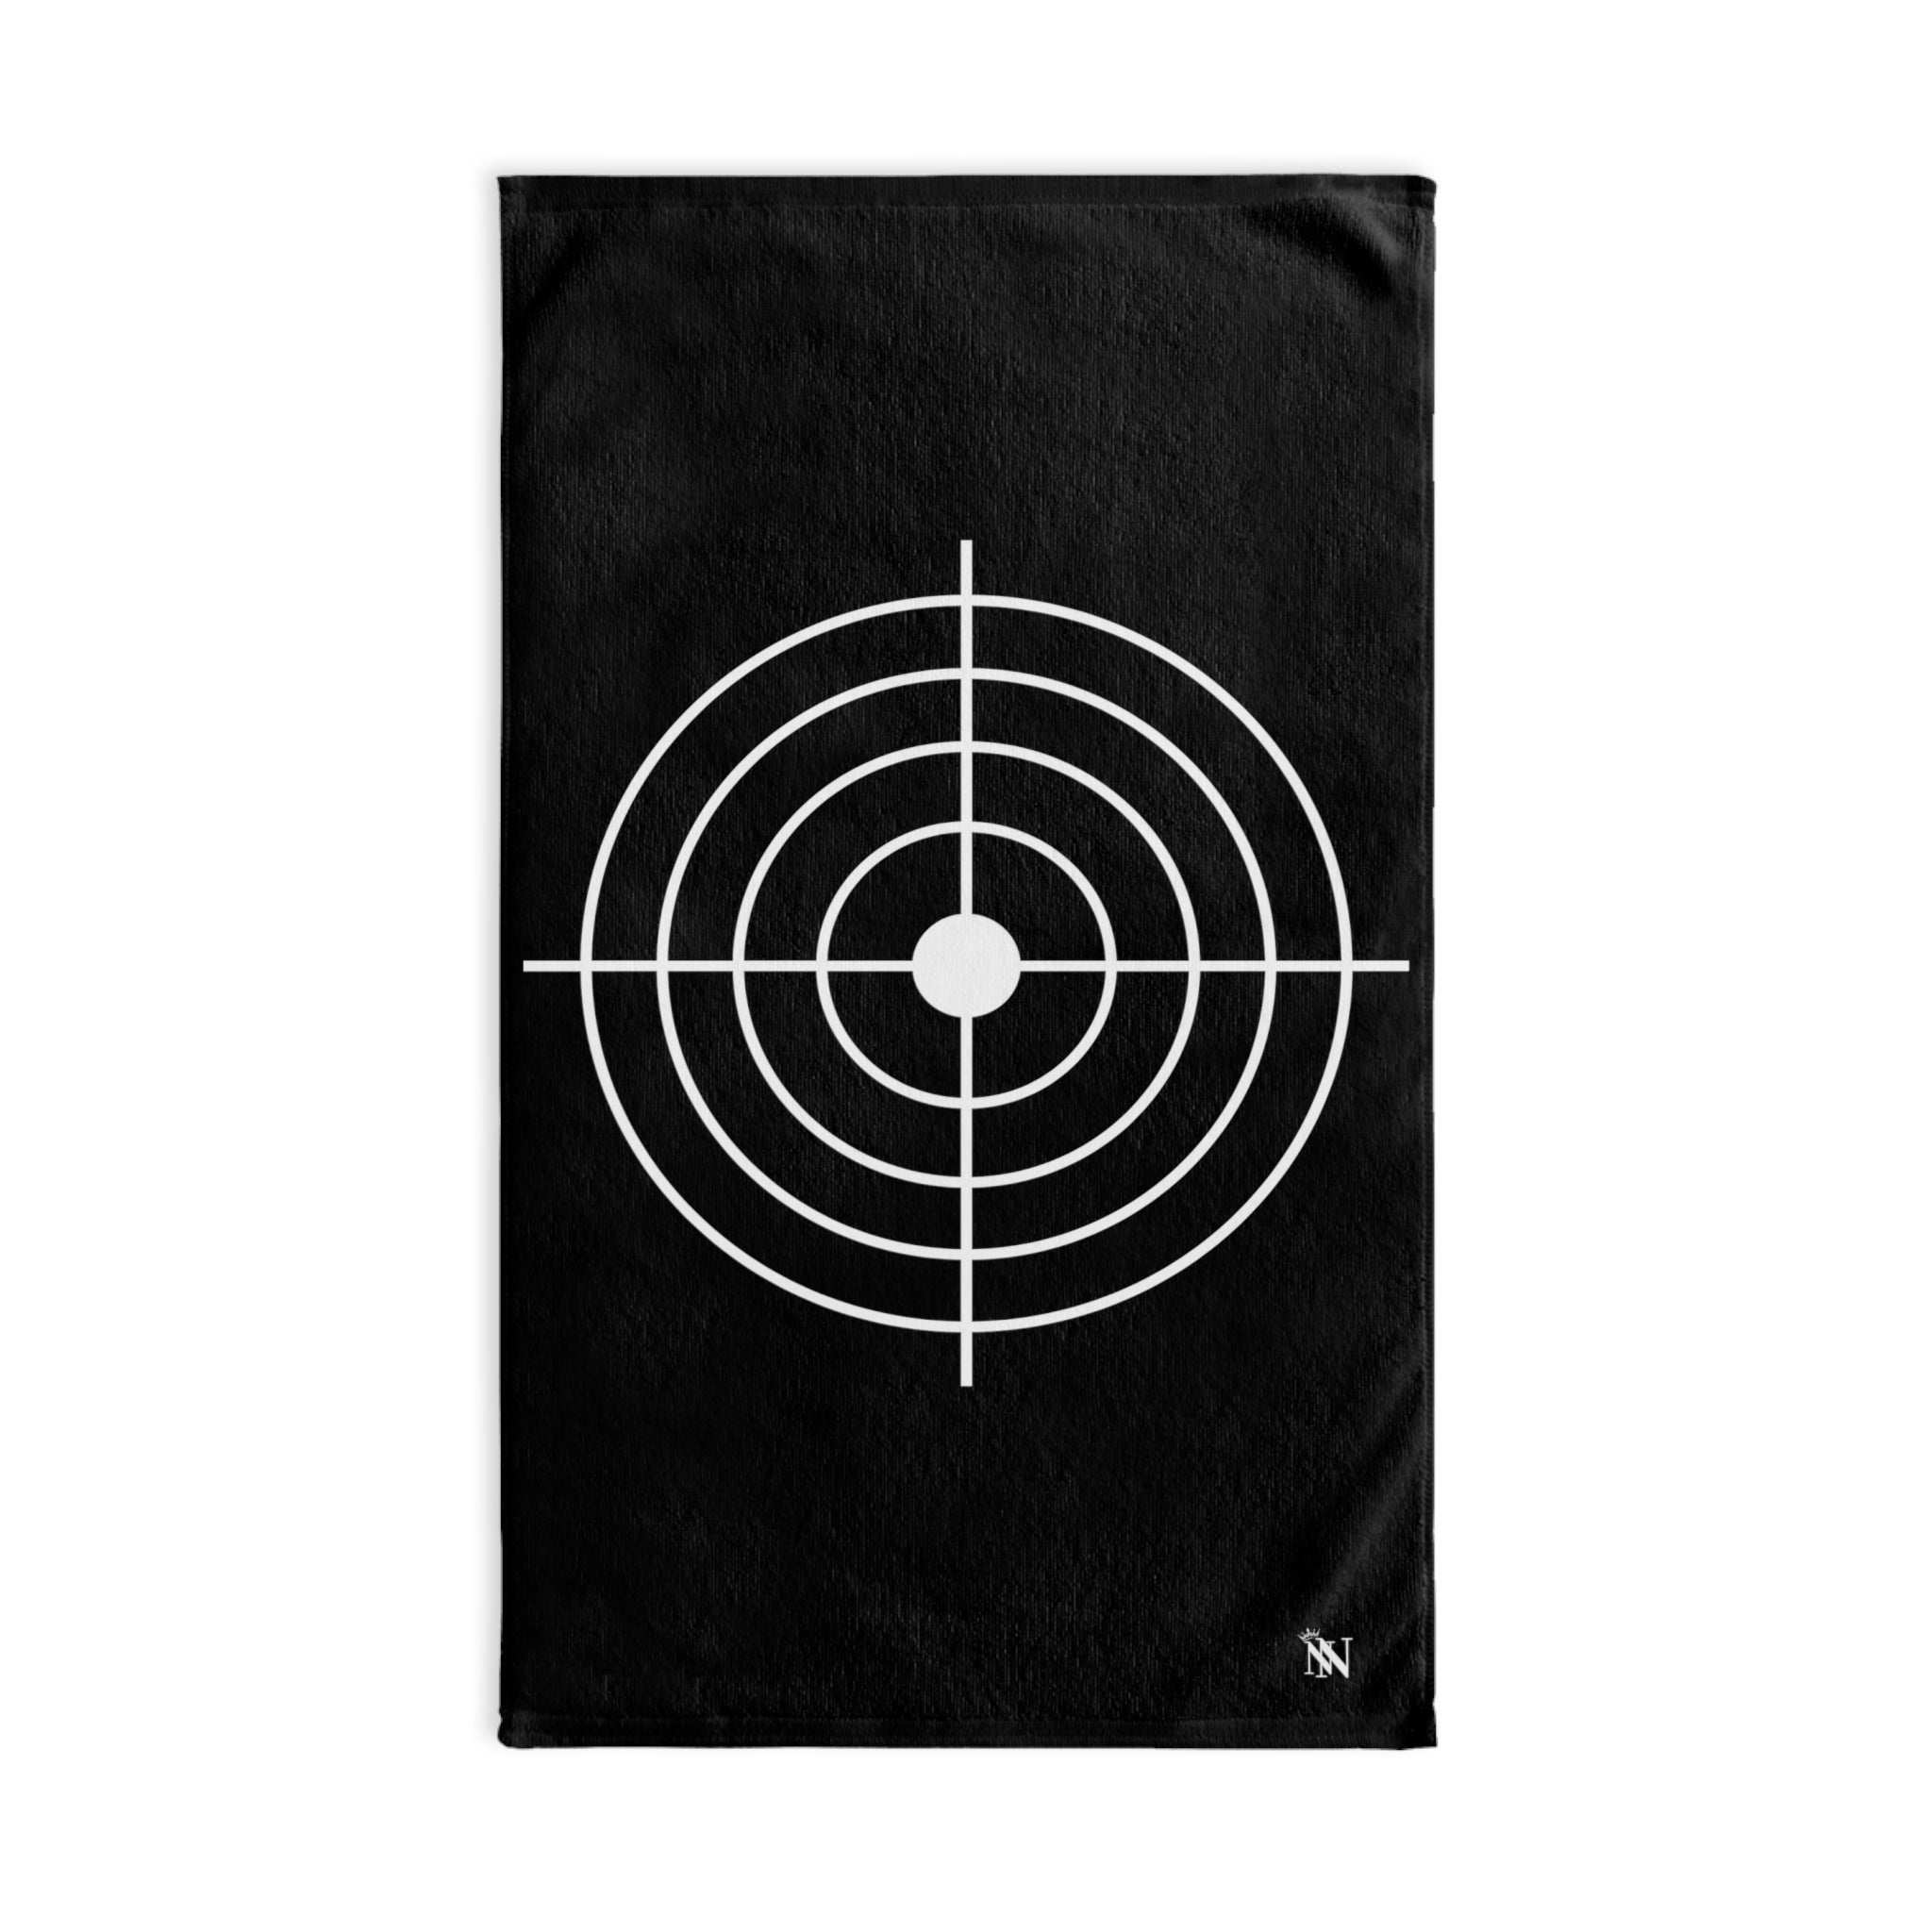 XL White Crosshairs Black | Sexy Gifts for Boyfriend, Funny Towel Romantic Gift for Wedding Couple Fiance First Year 2nd Anniversary Valentines, Party Gag Gifts, Joke Humor Cloth for Husband Men BF NECTAR NAPKINS